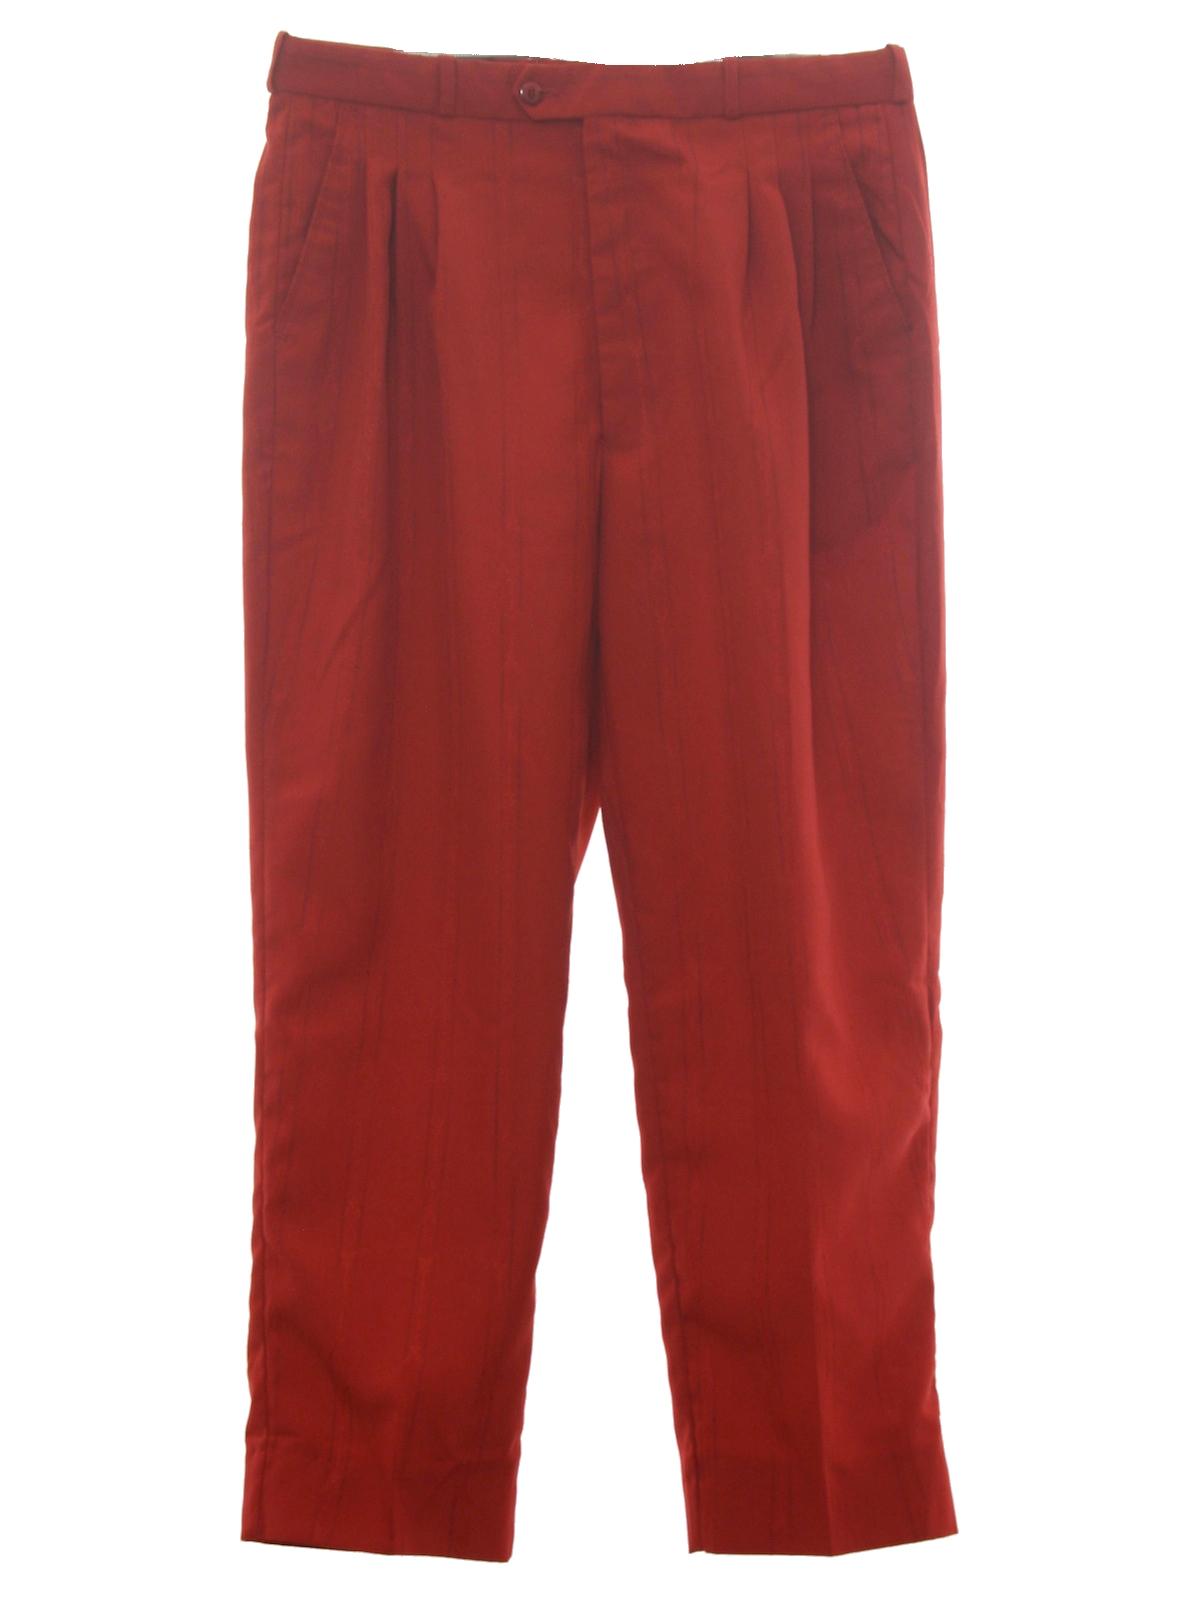 Vintage 1980's Pants: 80s -Pronti- Mens red background with black ...